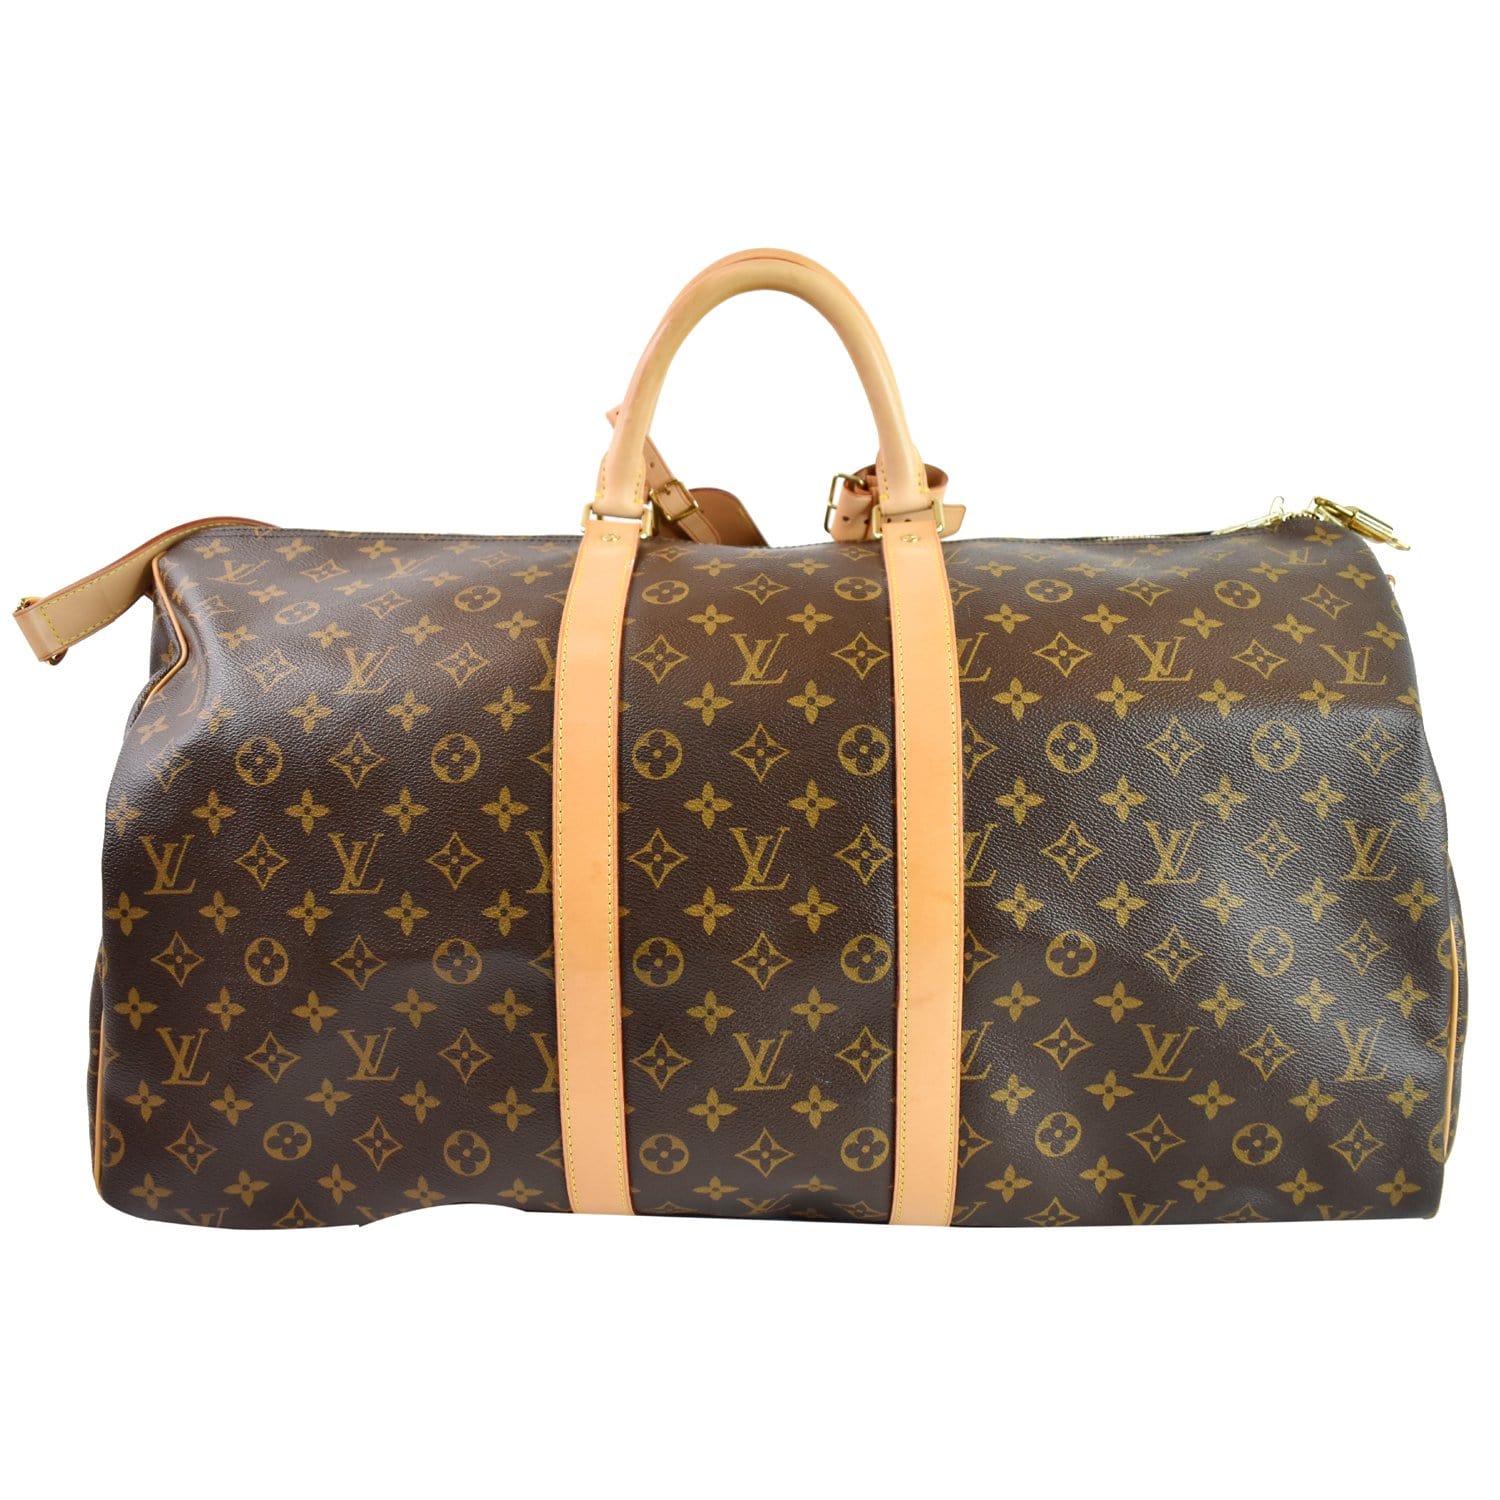 Louis Vuitton Monogram Keepall 55 Bandouliere Duffle Carry-On Bag